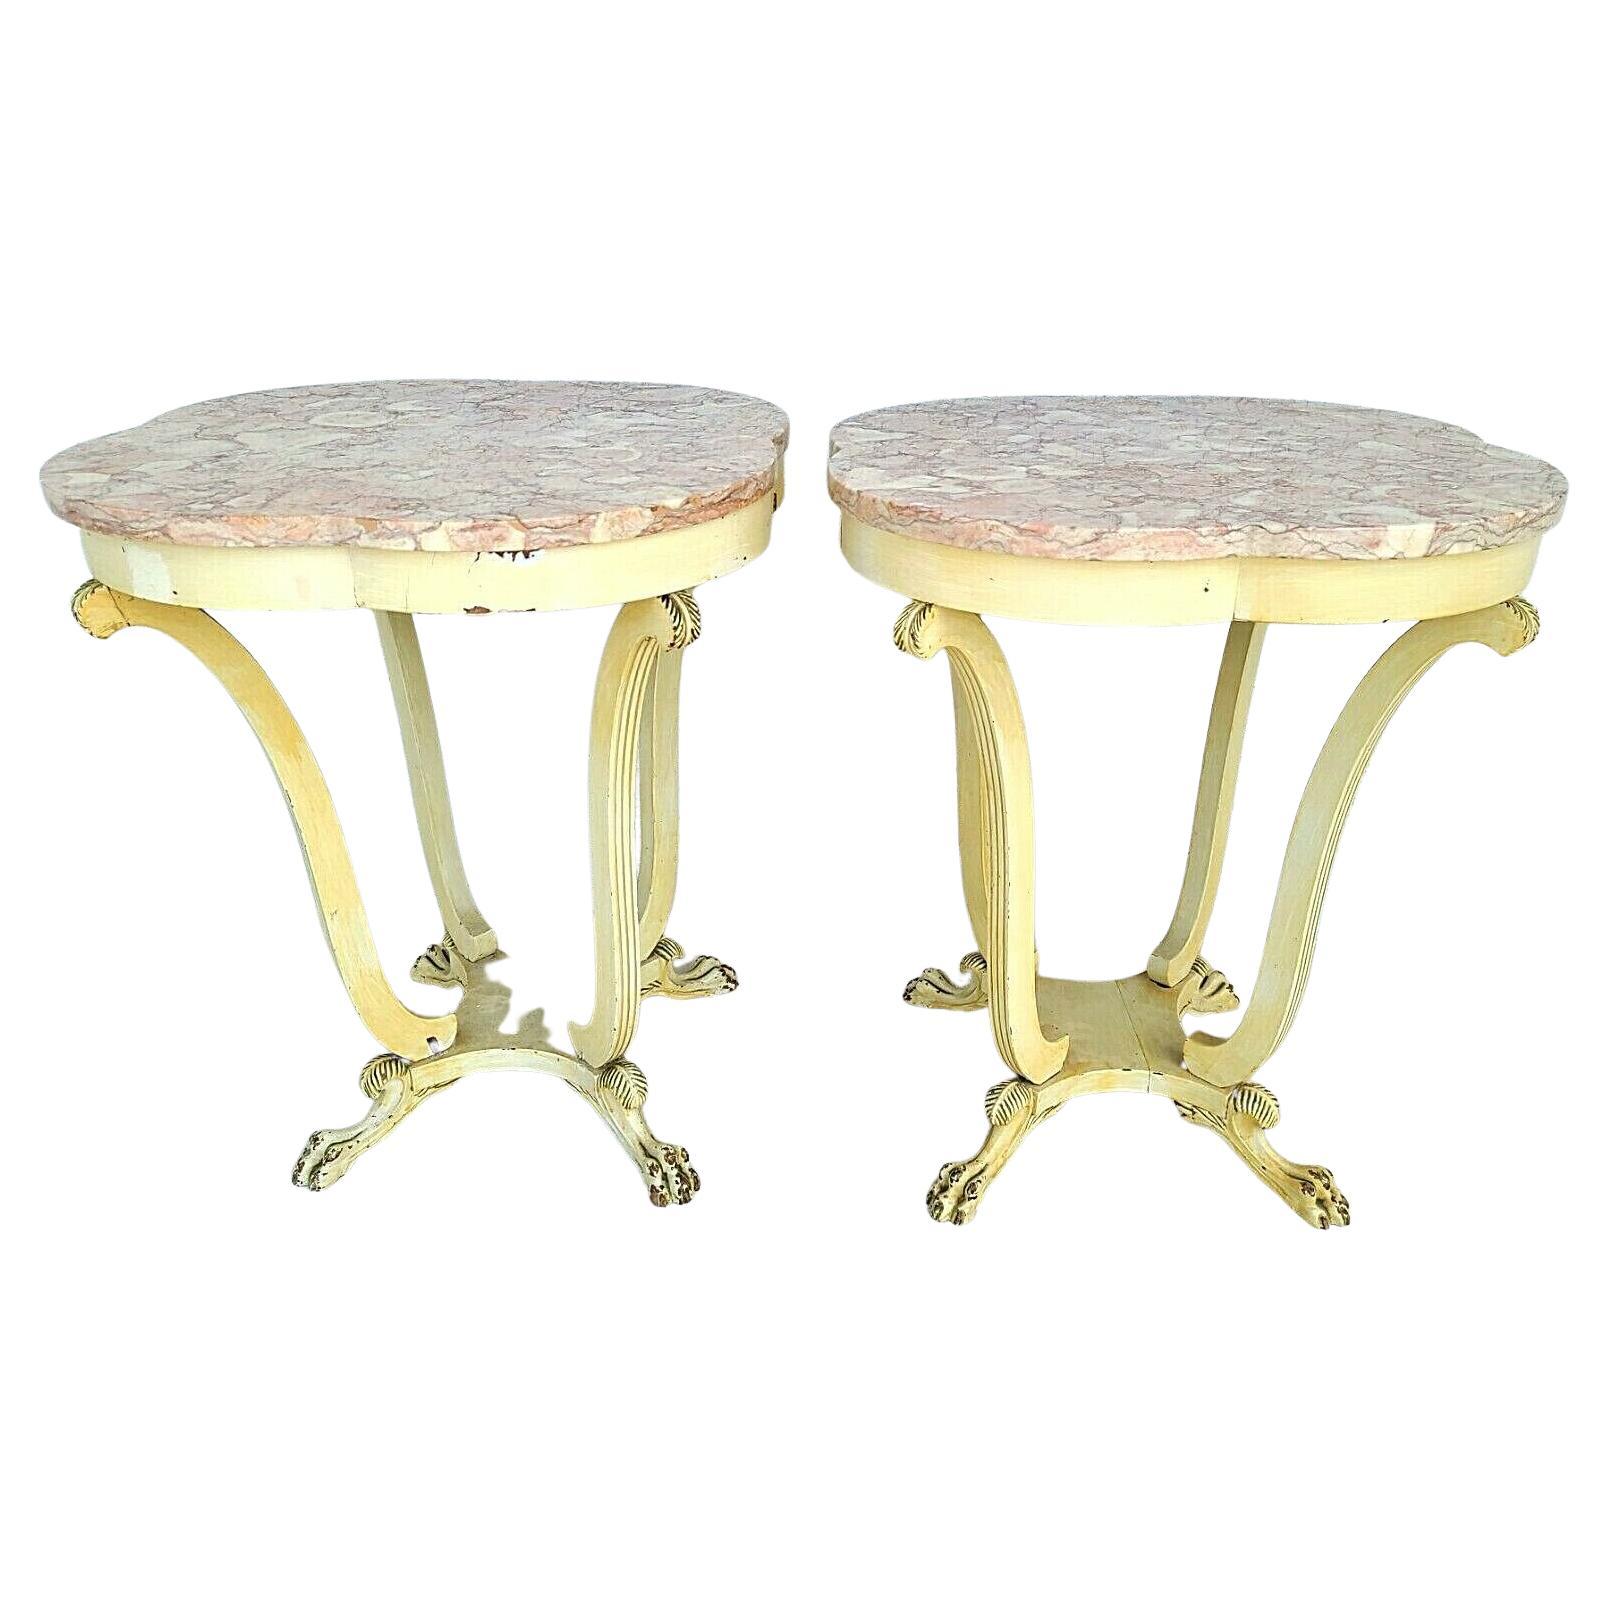 Antique Louis XV Style Claw Footed Marble Side Tables Nightstands, A Pair